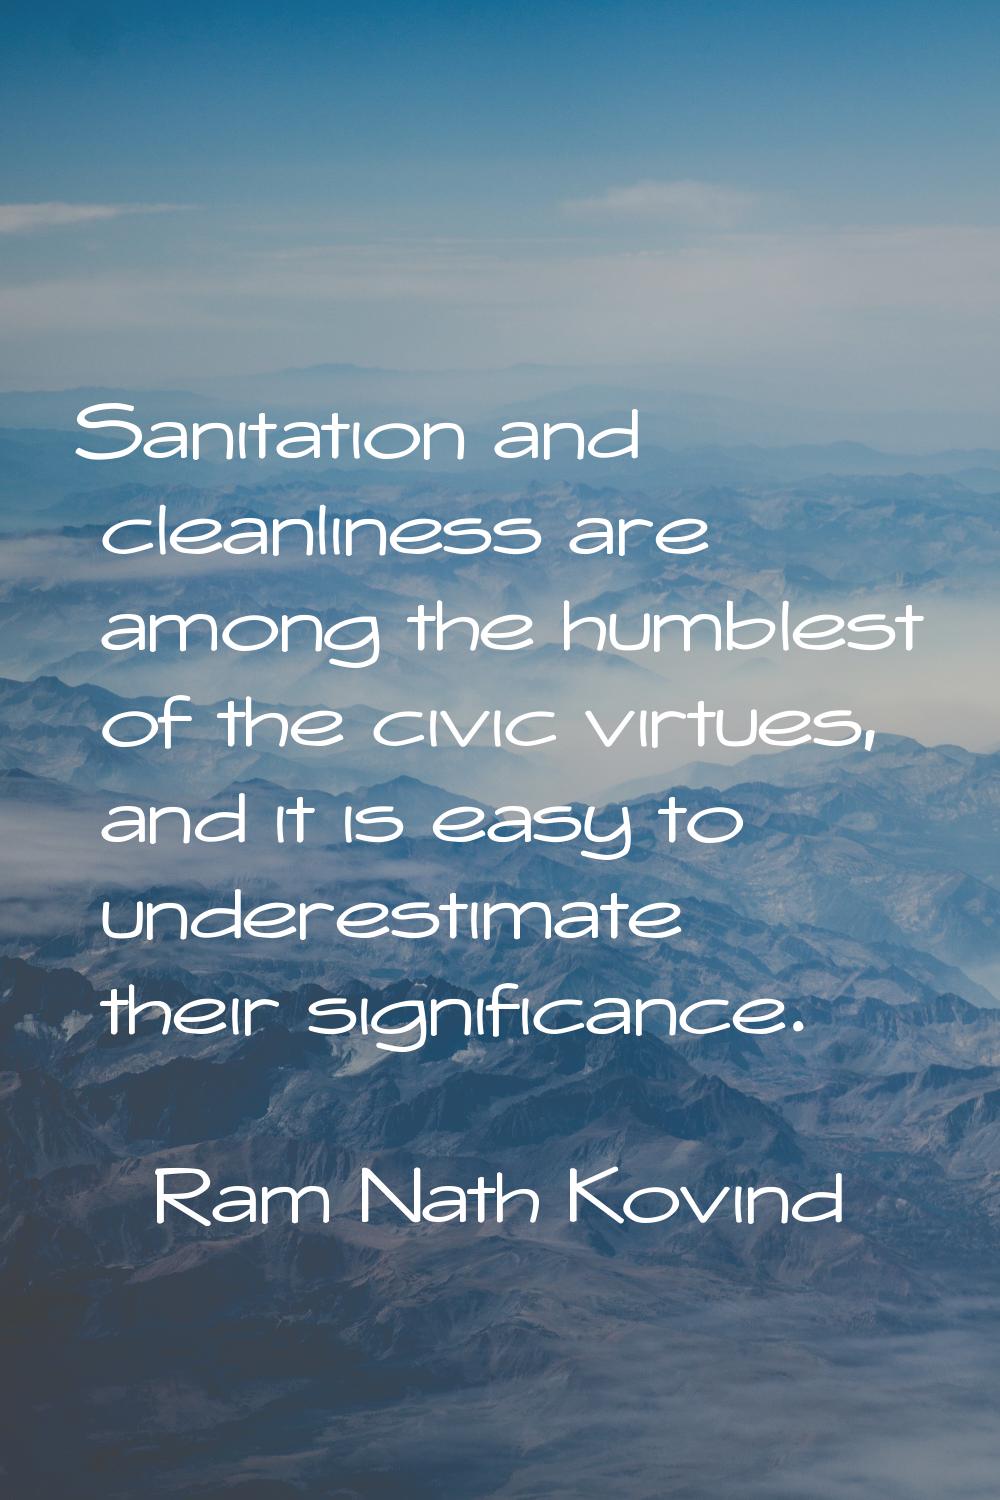 Sanitation and cleanliness are among the humblest of the civic virtues, and it is easy to underesti